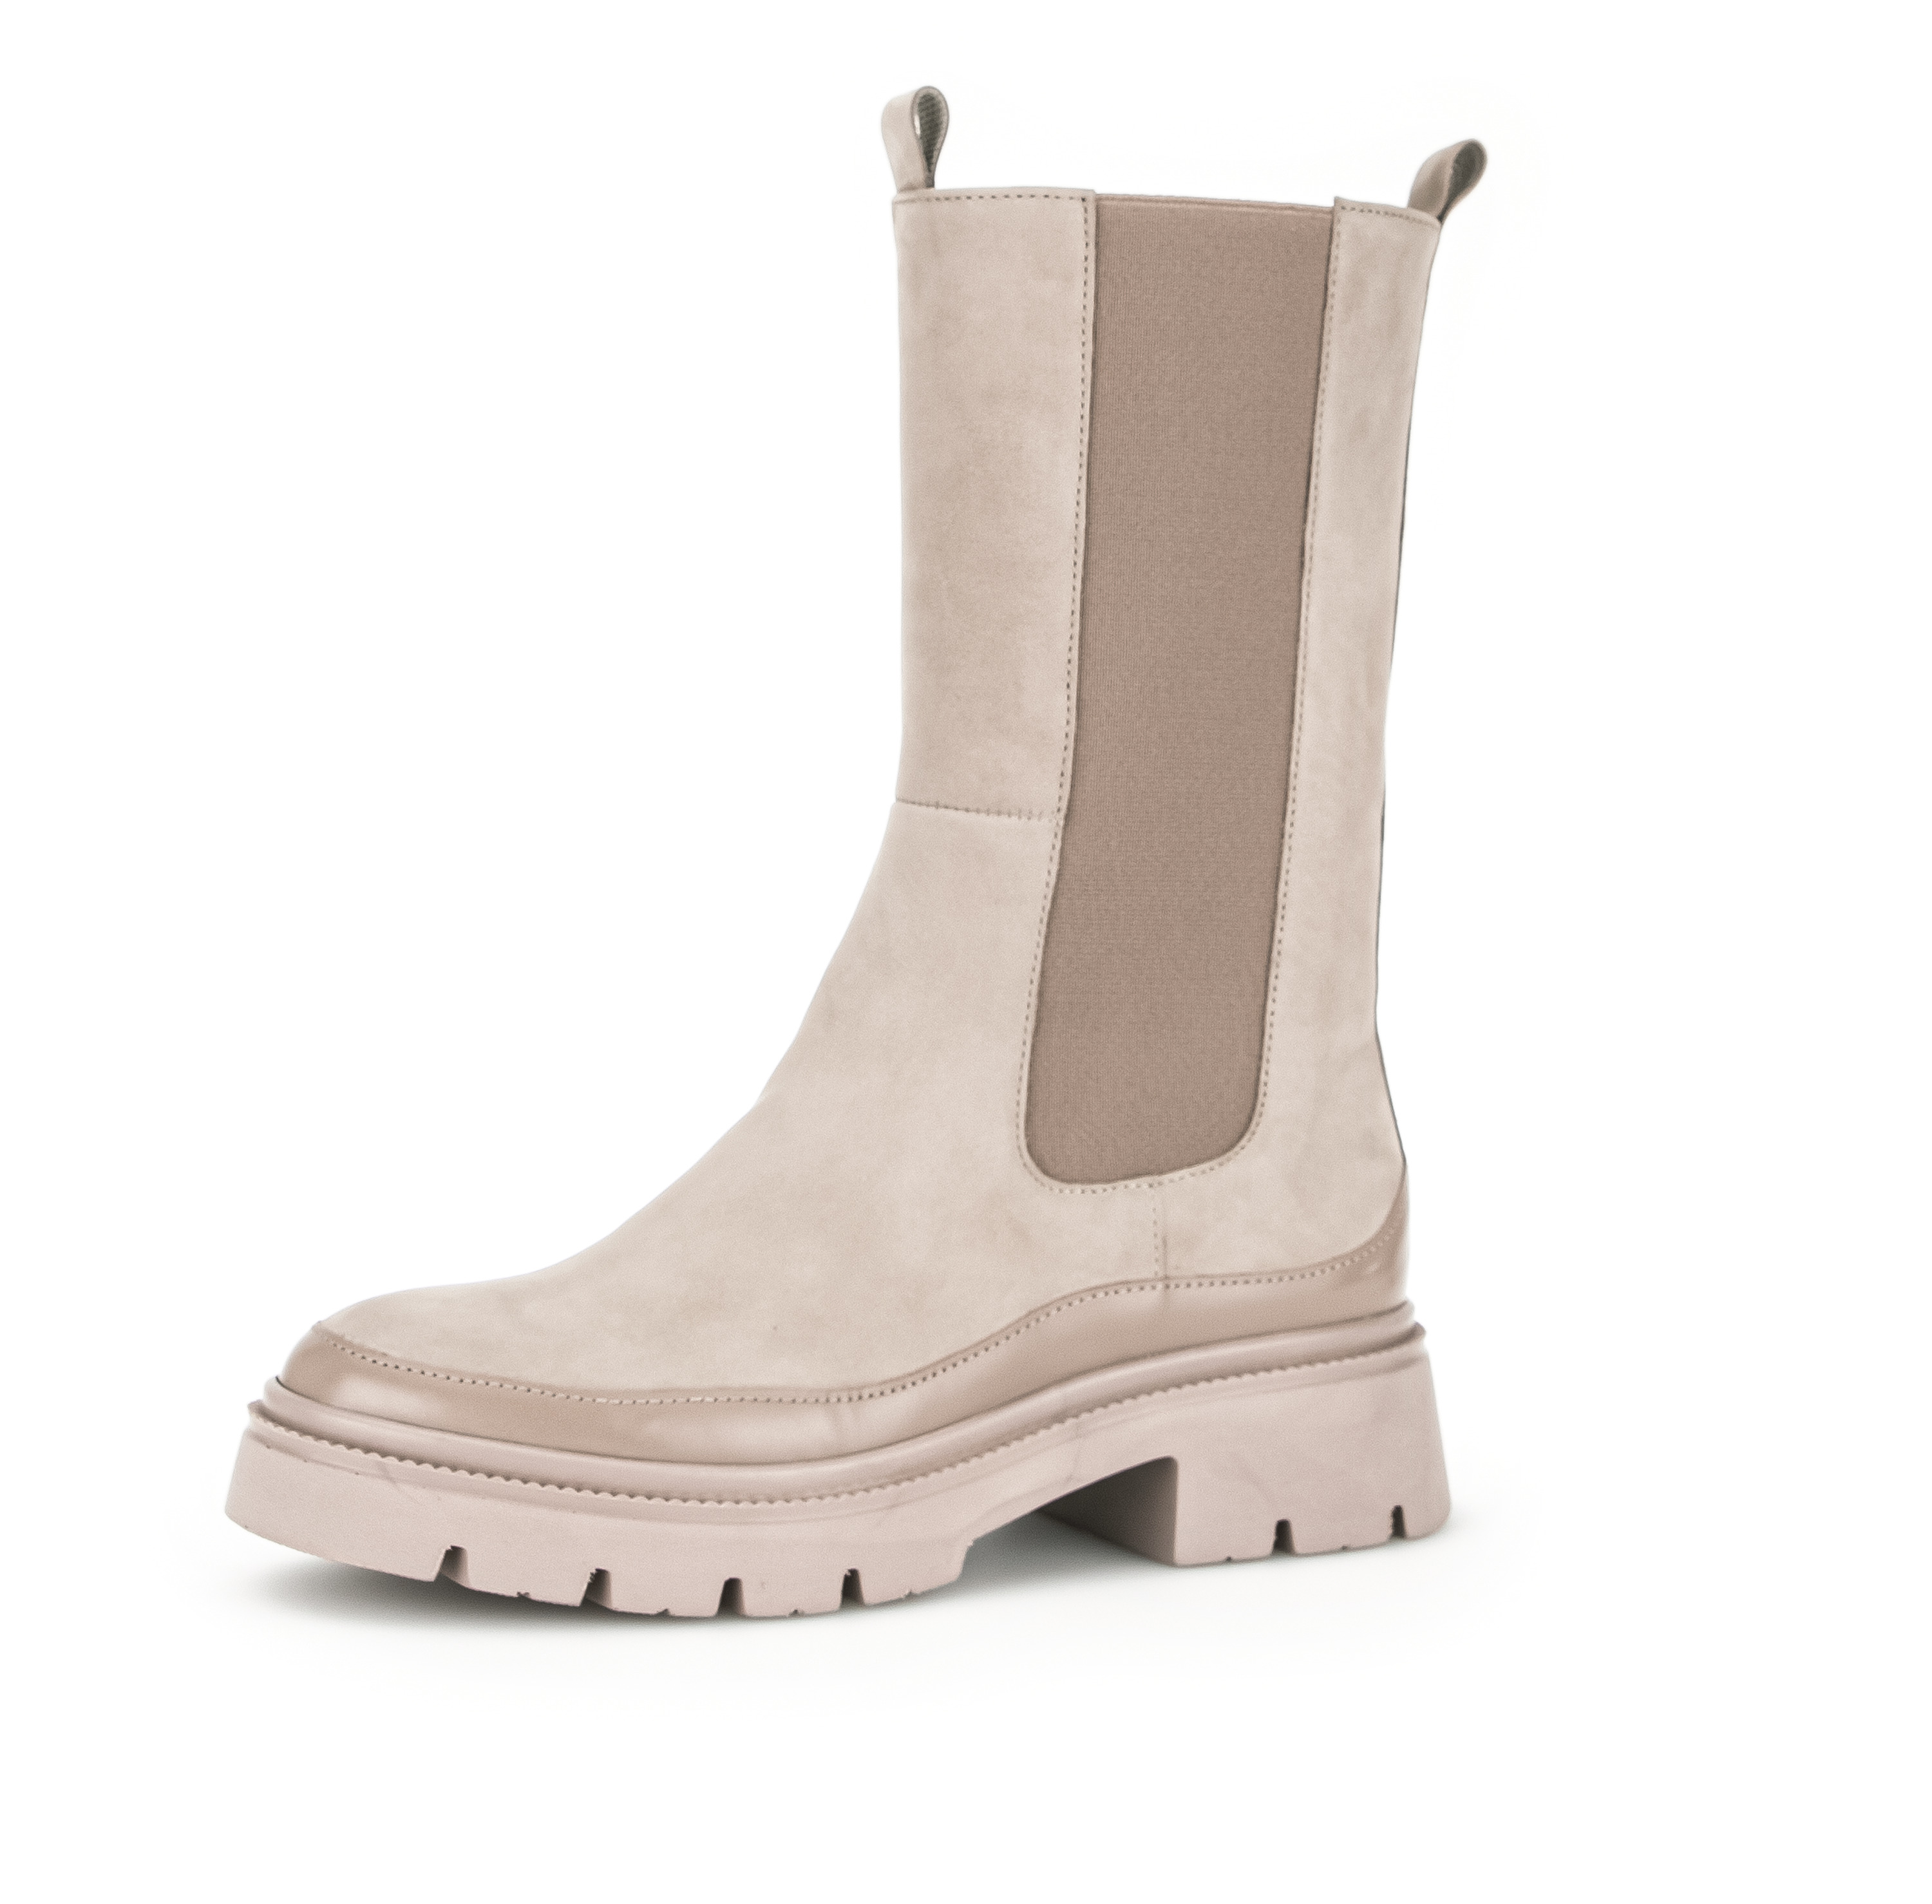 Chelsea Boot - Beige suede leather